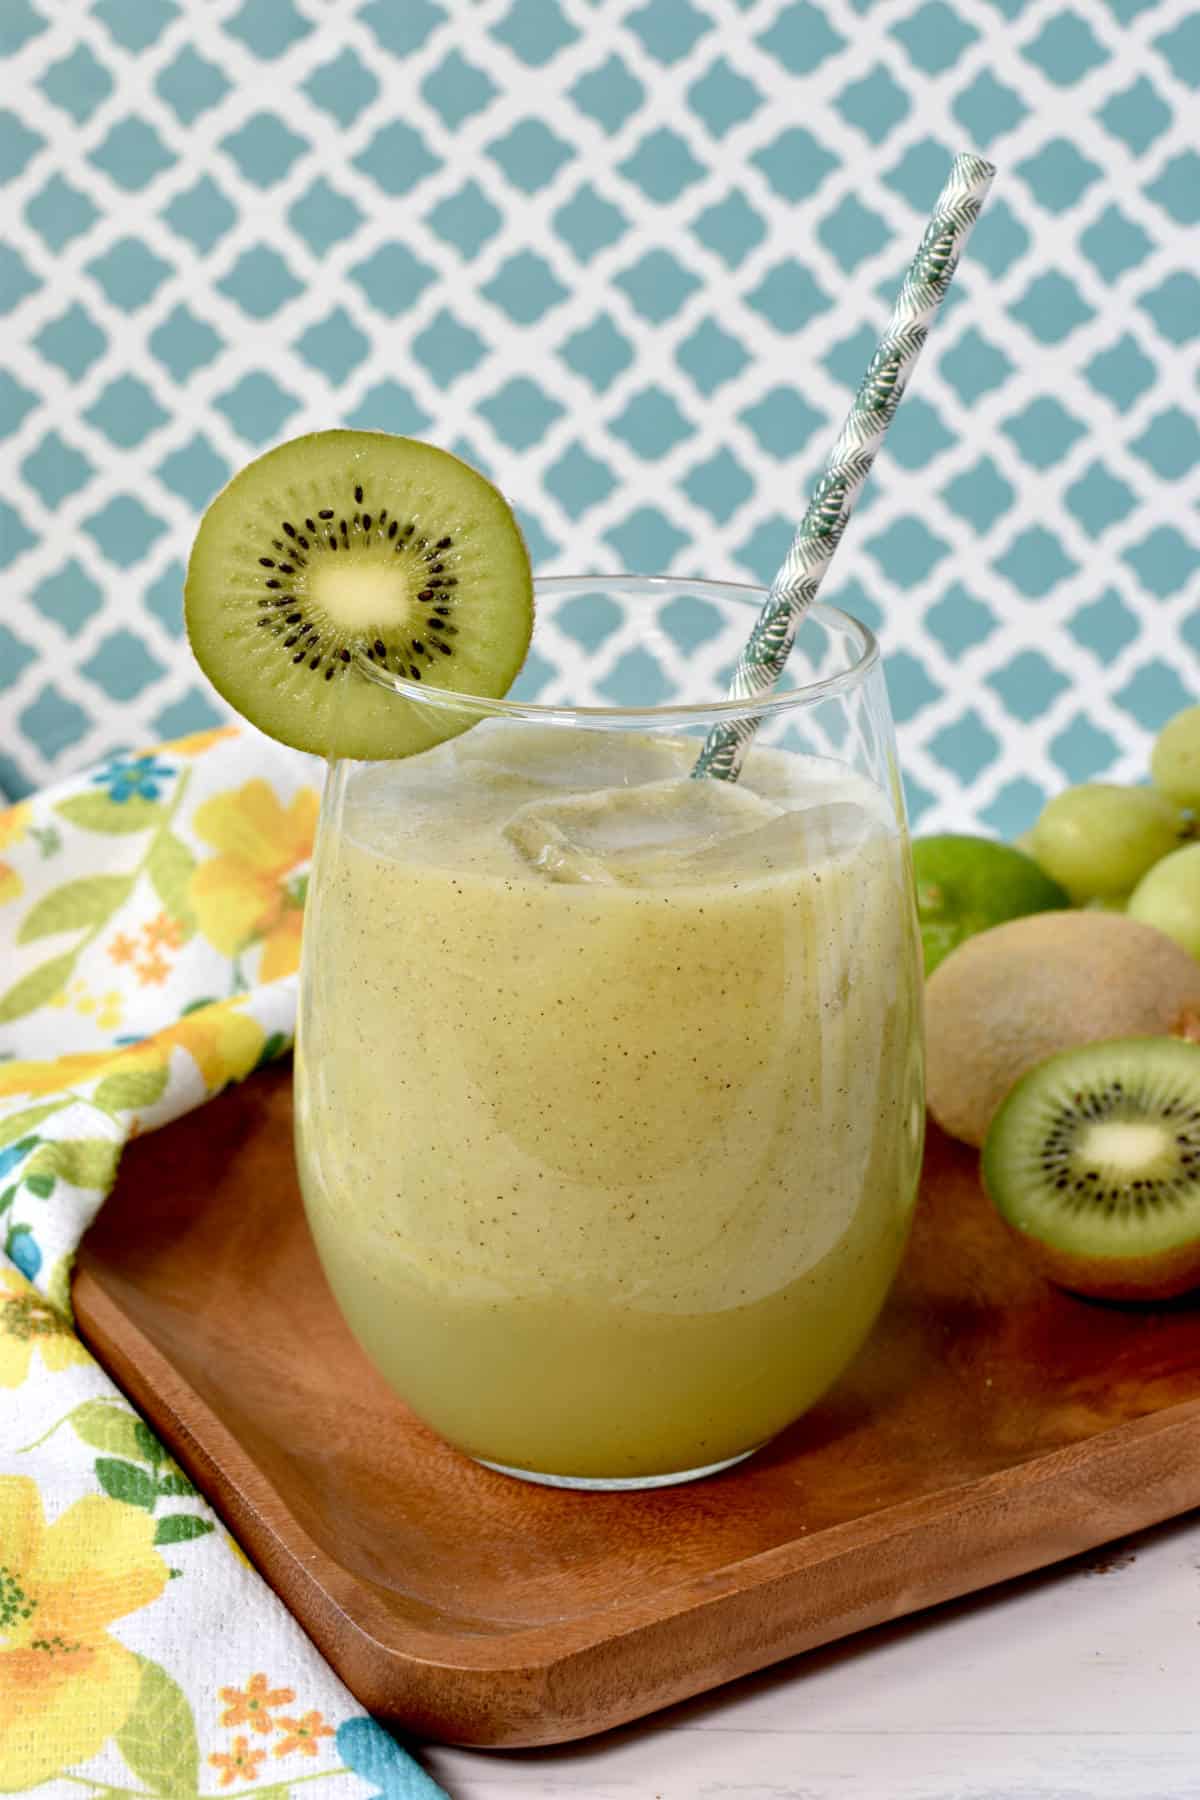 smootie with a kiwi slice garnishing and a paper straw inside the cup